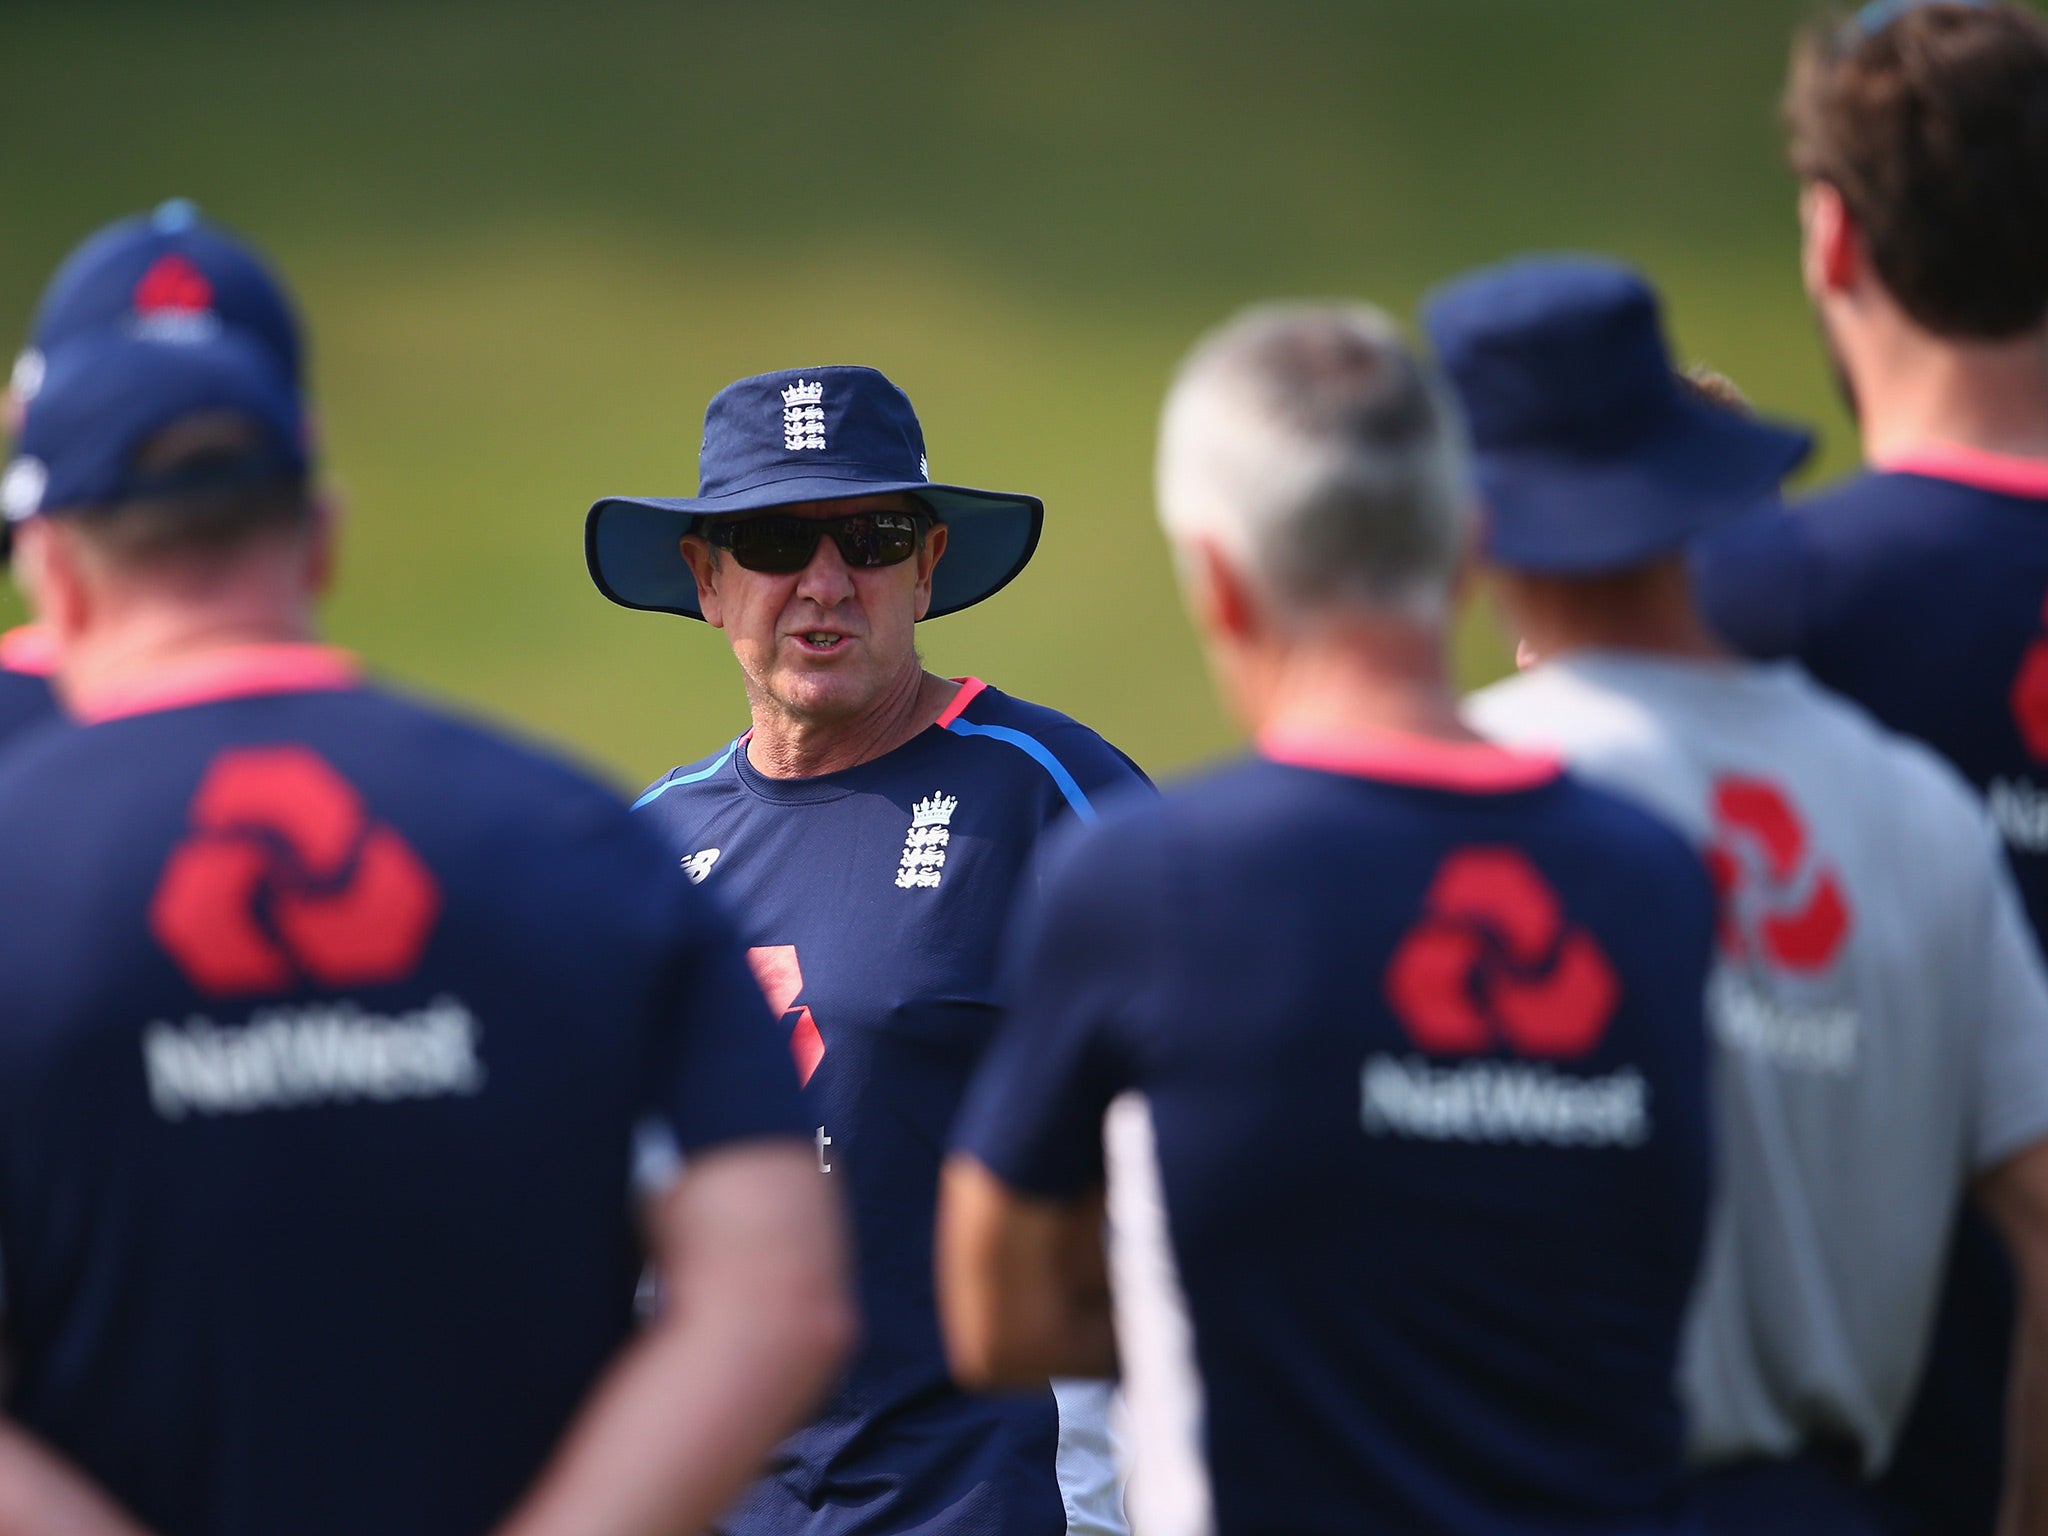 Trevor Bayliss' top six will be one batsman short of real quality whatever he does